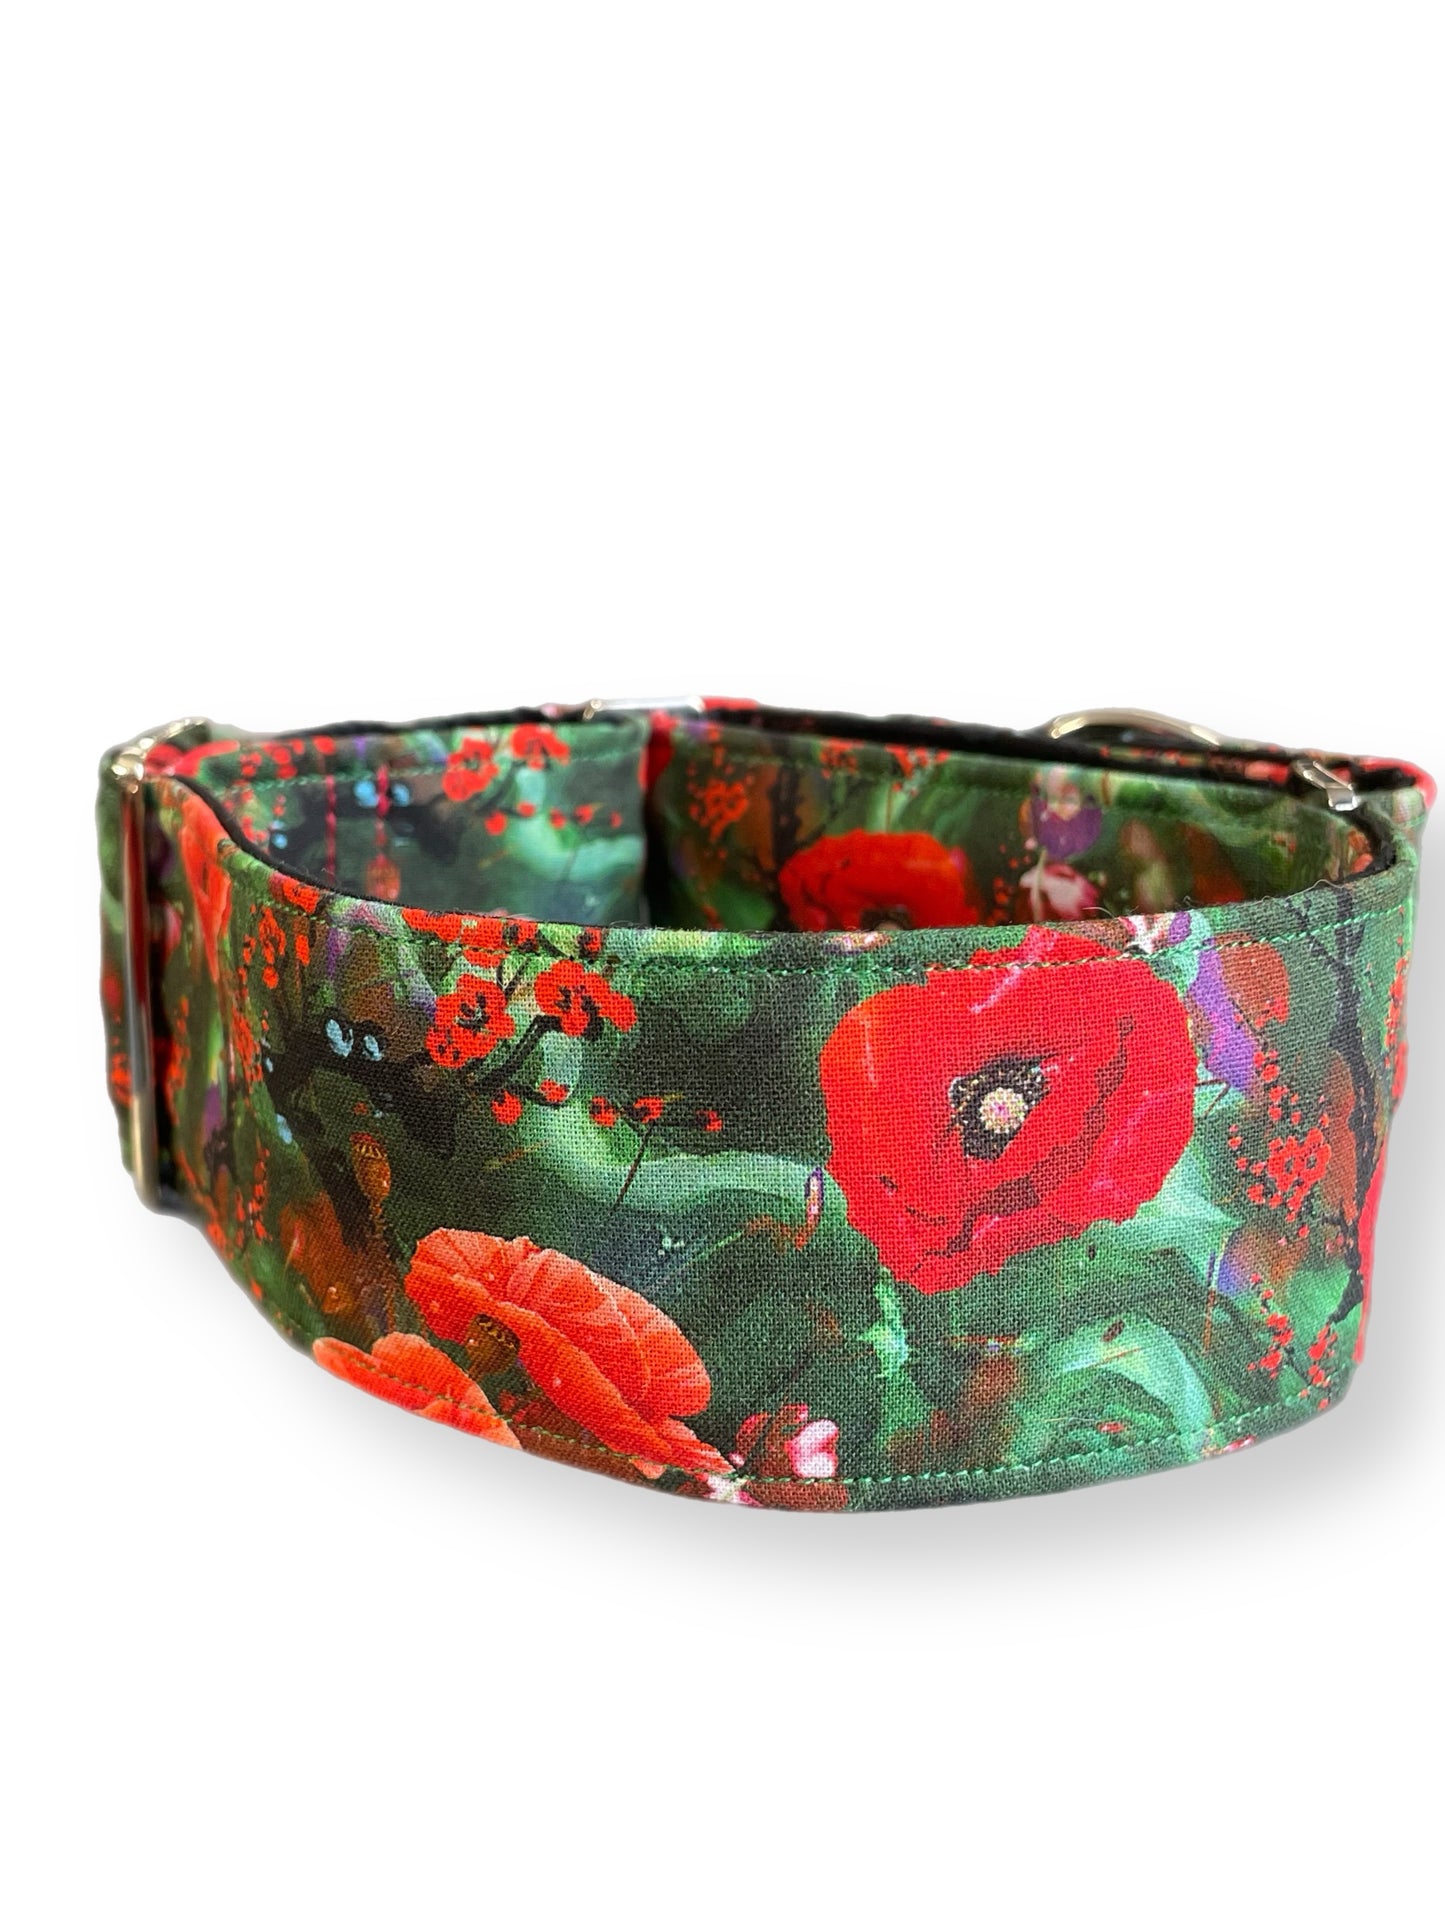 Beautiful red poppies on lush green greyhound Martingale collar cotton covered 50mm width super soft